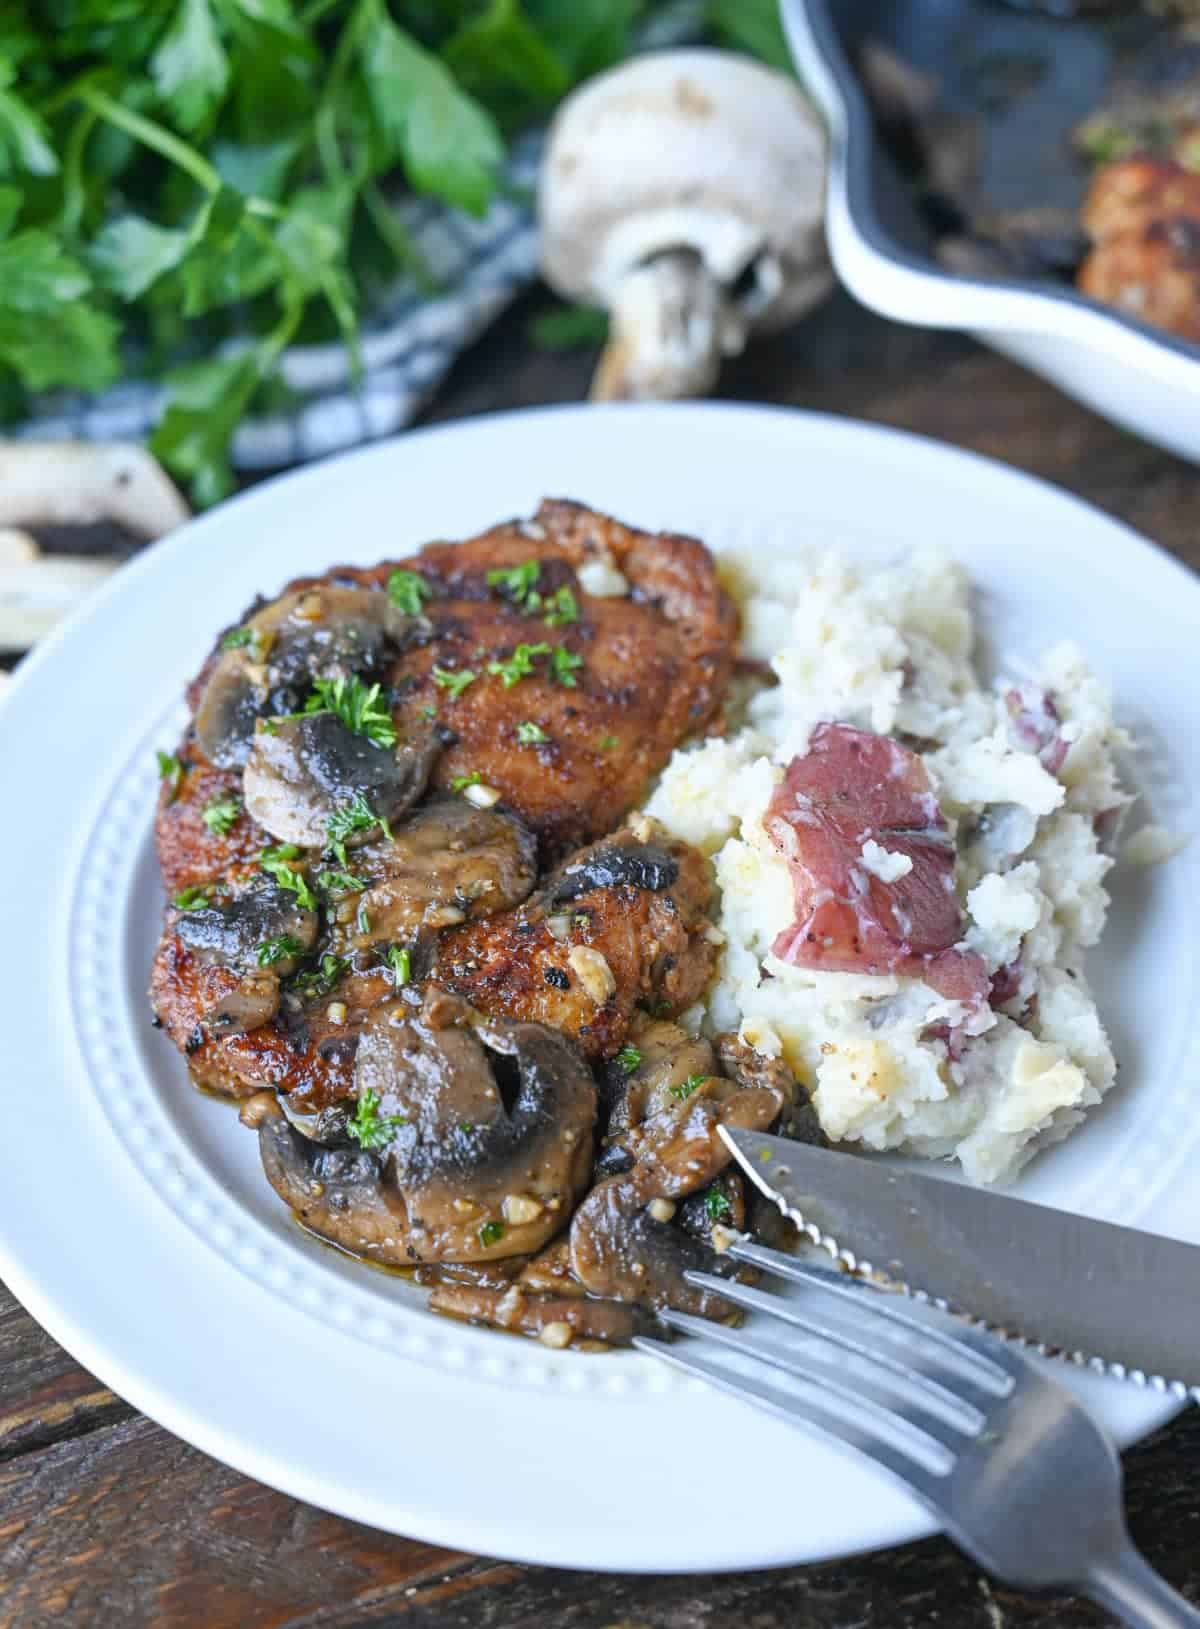 Chicken thigh with garlic mushrooms on top with a side of red mashed potatoes on a white plate.